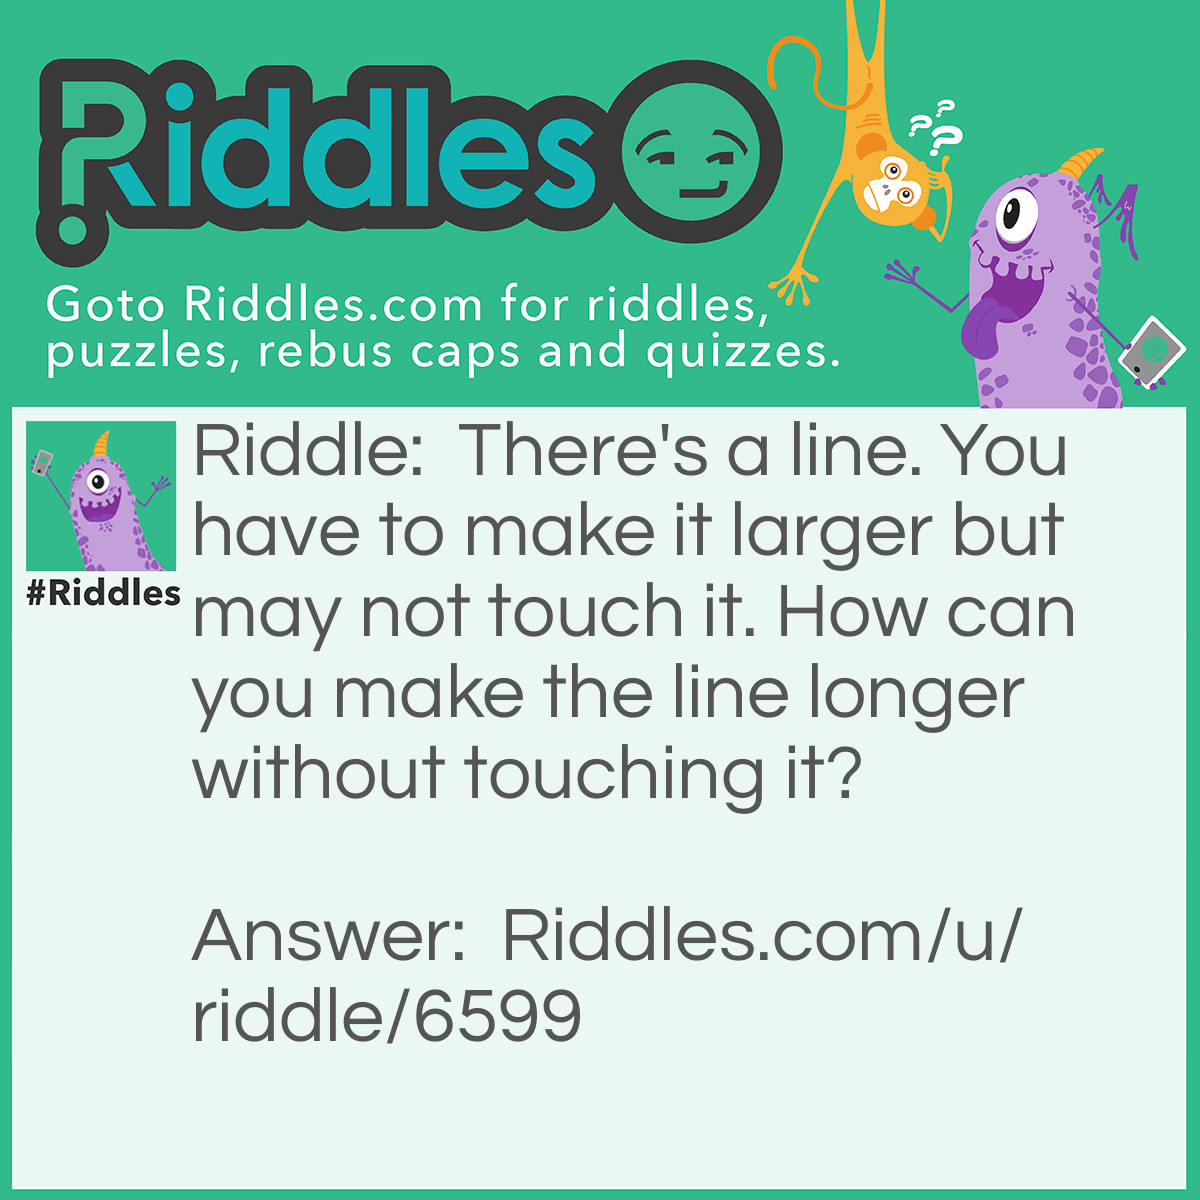 Riddle: There's a line. You have to make it larger but may not touch it. How can you make the line longer without touching it? Answer: Go over a little to the right of the line and make a new line. Therefore, the line was made bigger without touching it!